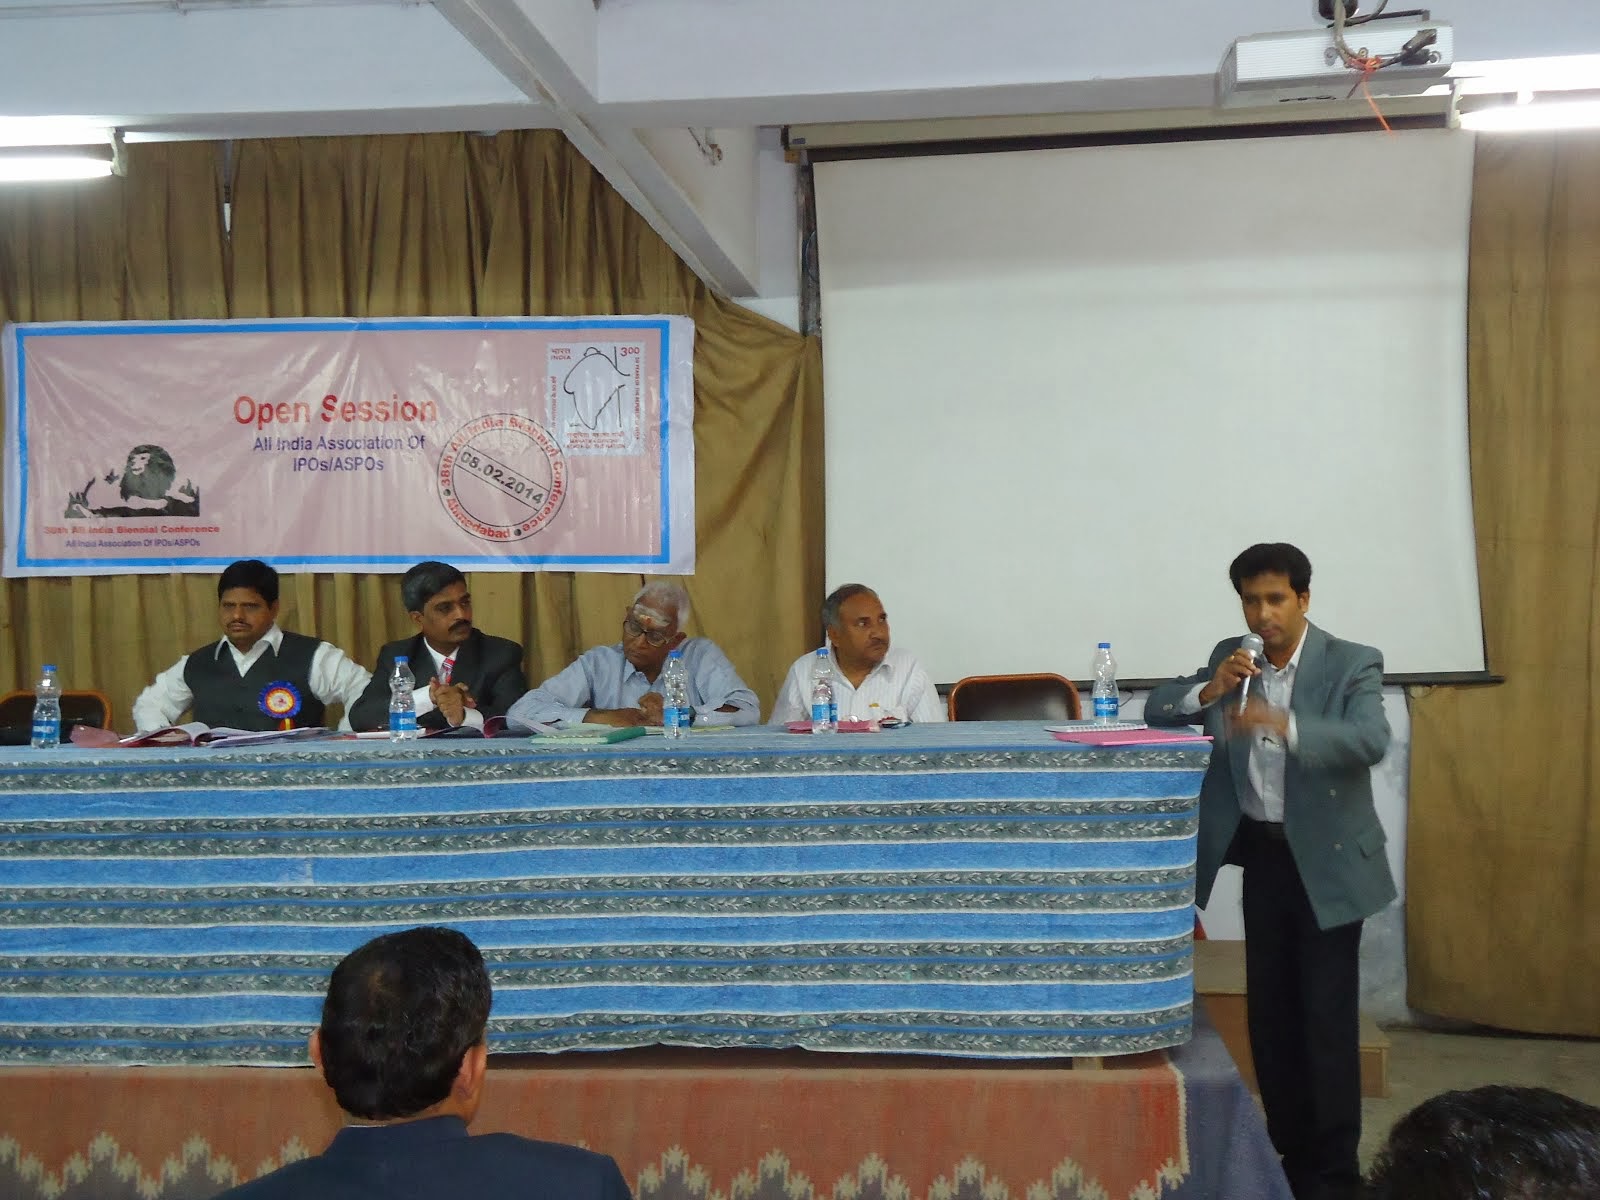 38th All India Conference held on 7th and 8th February, 2014 at Ahmedabad